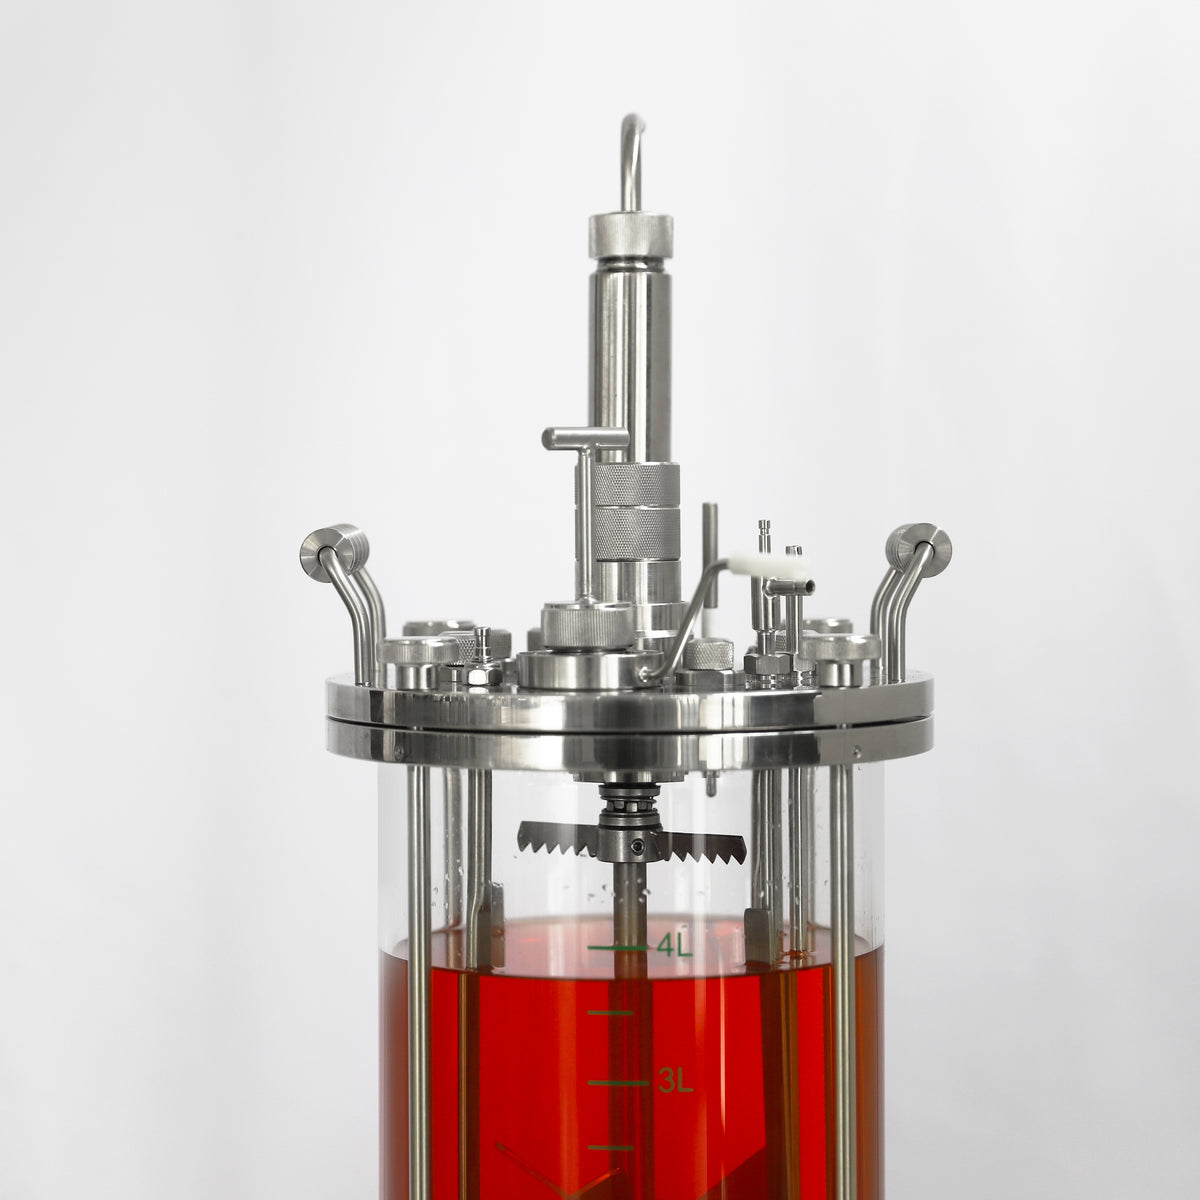 3L Benchtop Bioreactor for Microbial Fermentation with 2 Gas Inlets BR100-C1